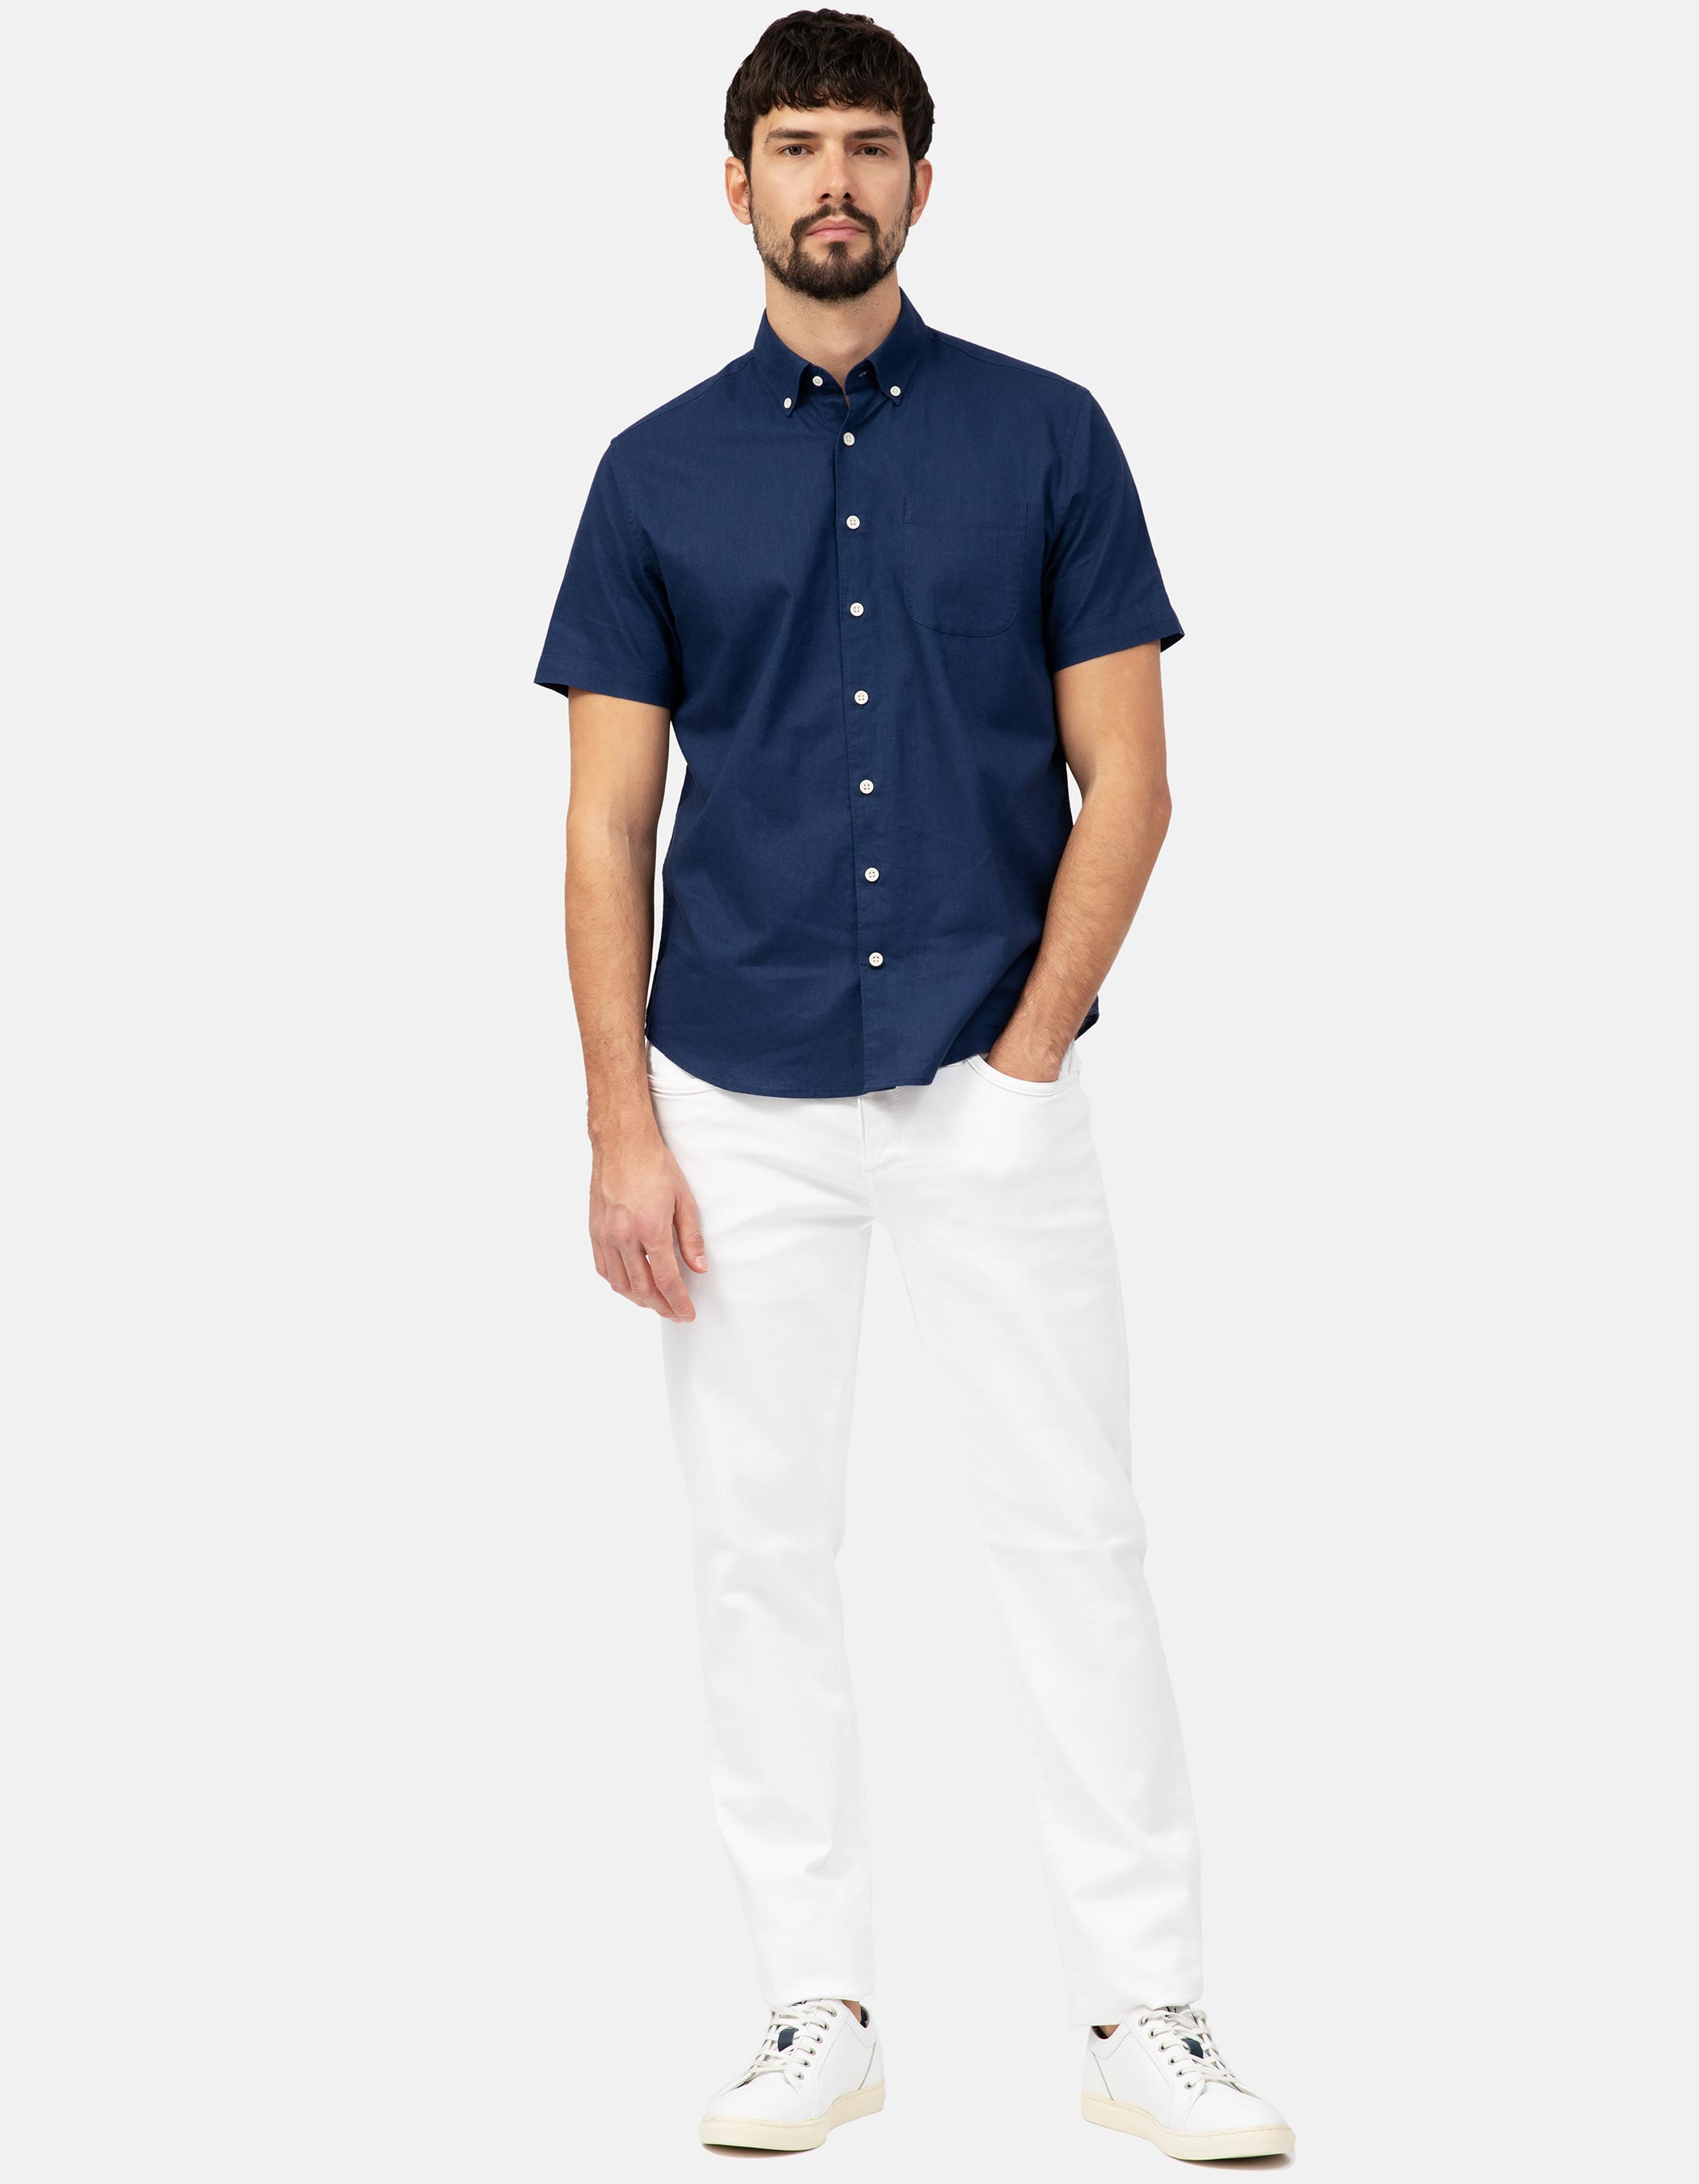 Linen and cotton shirt with short sleeves. 3